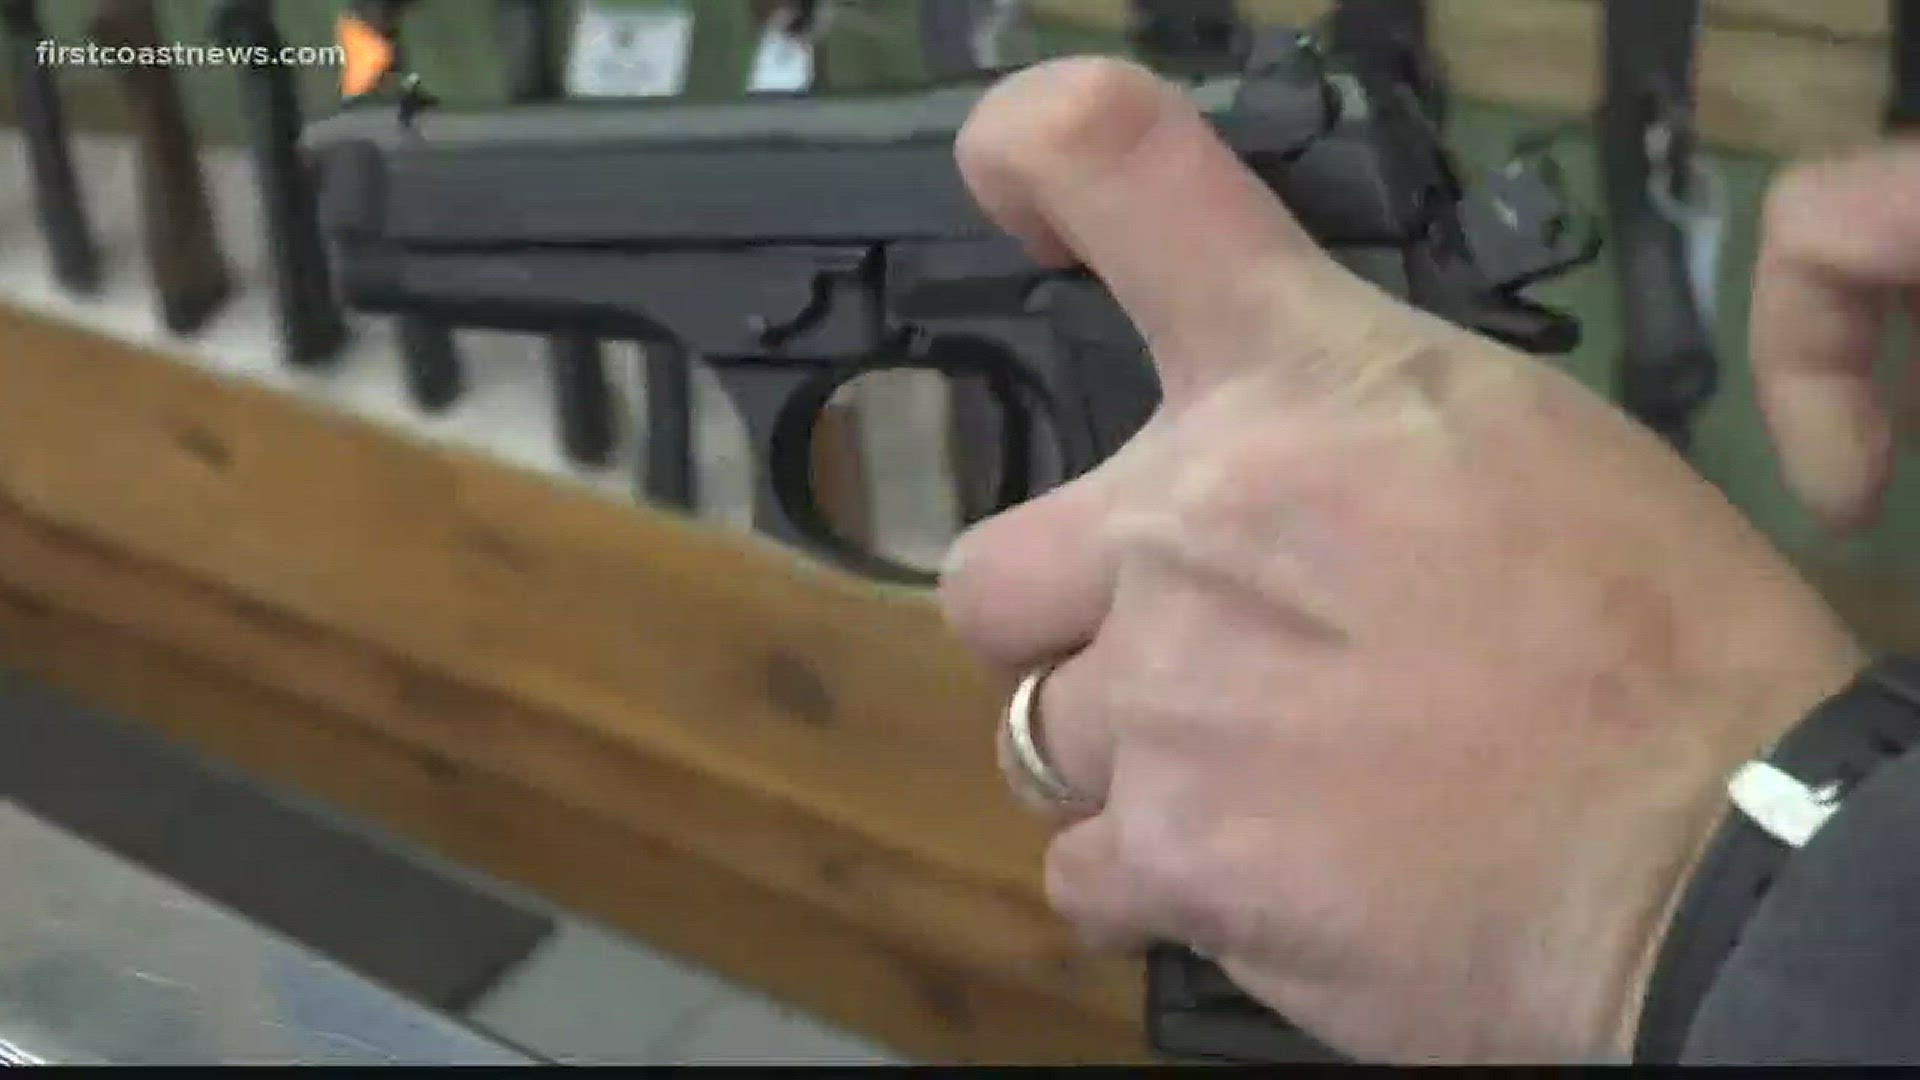 A pro-gun group here in Florida wants to see teachers armed in the classrooms with guns.